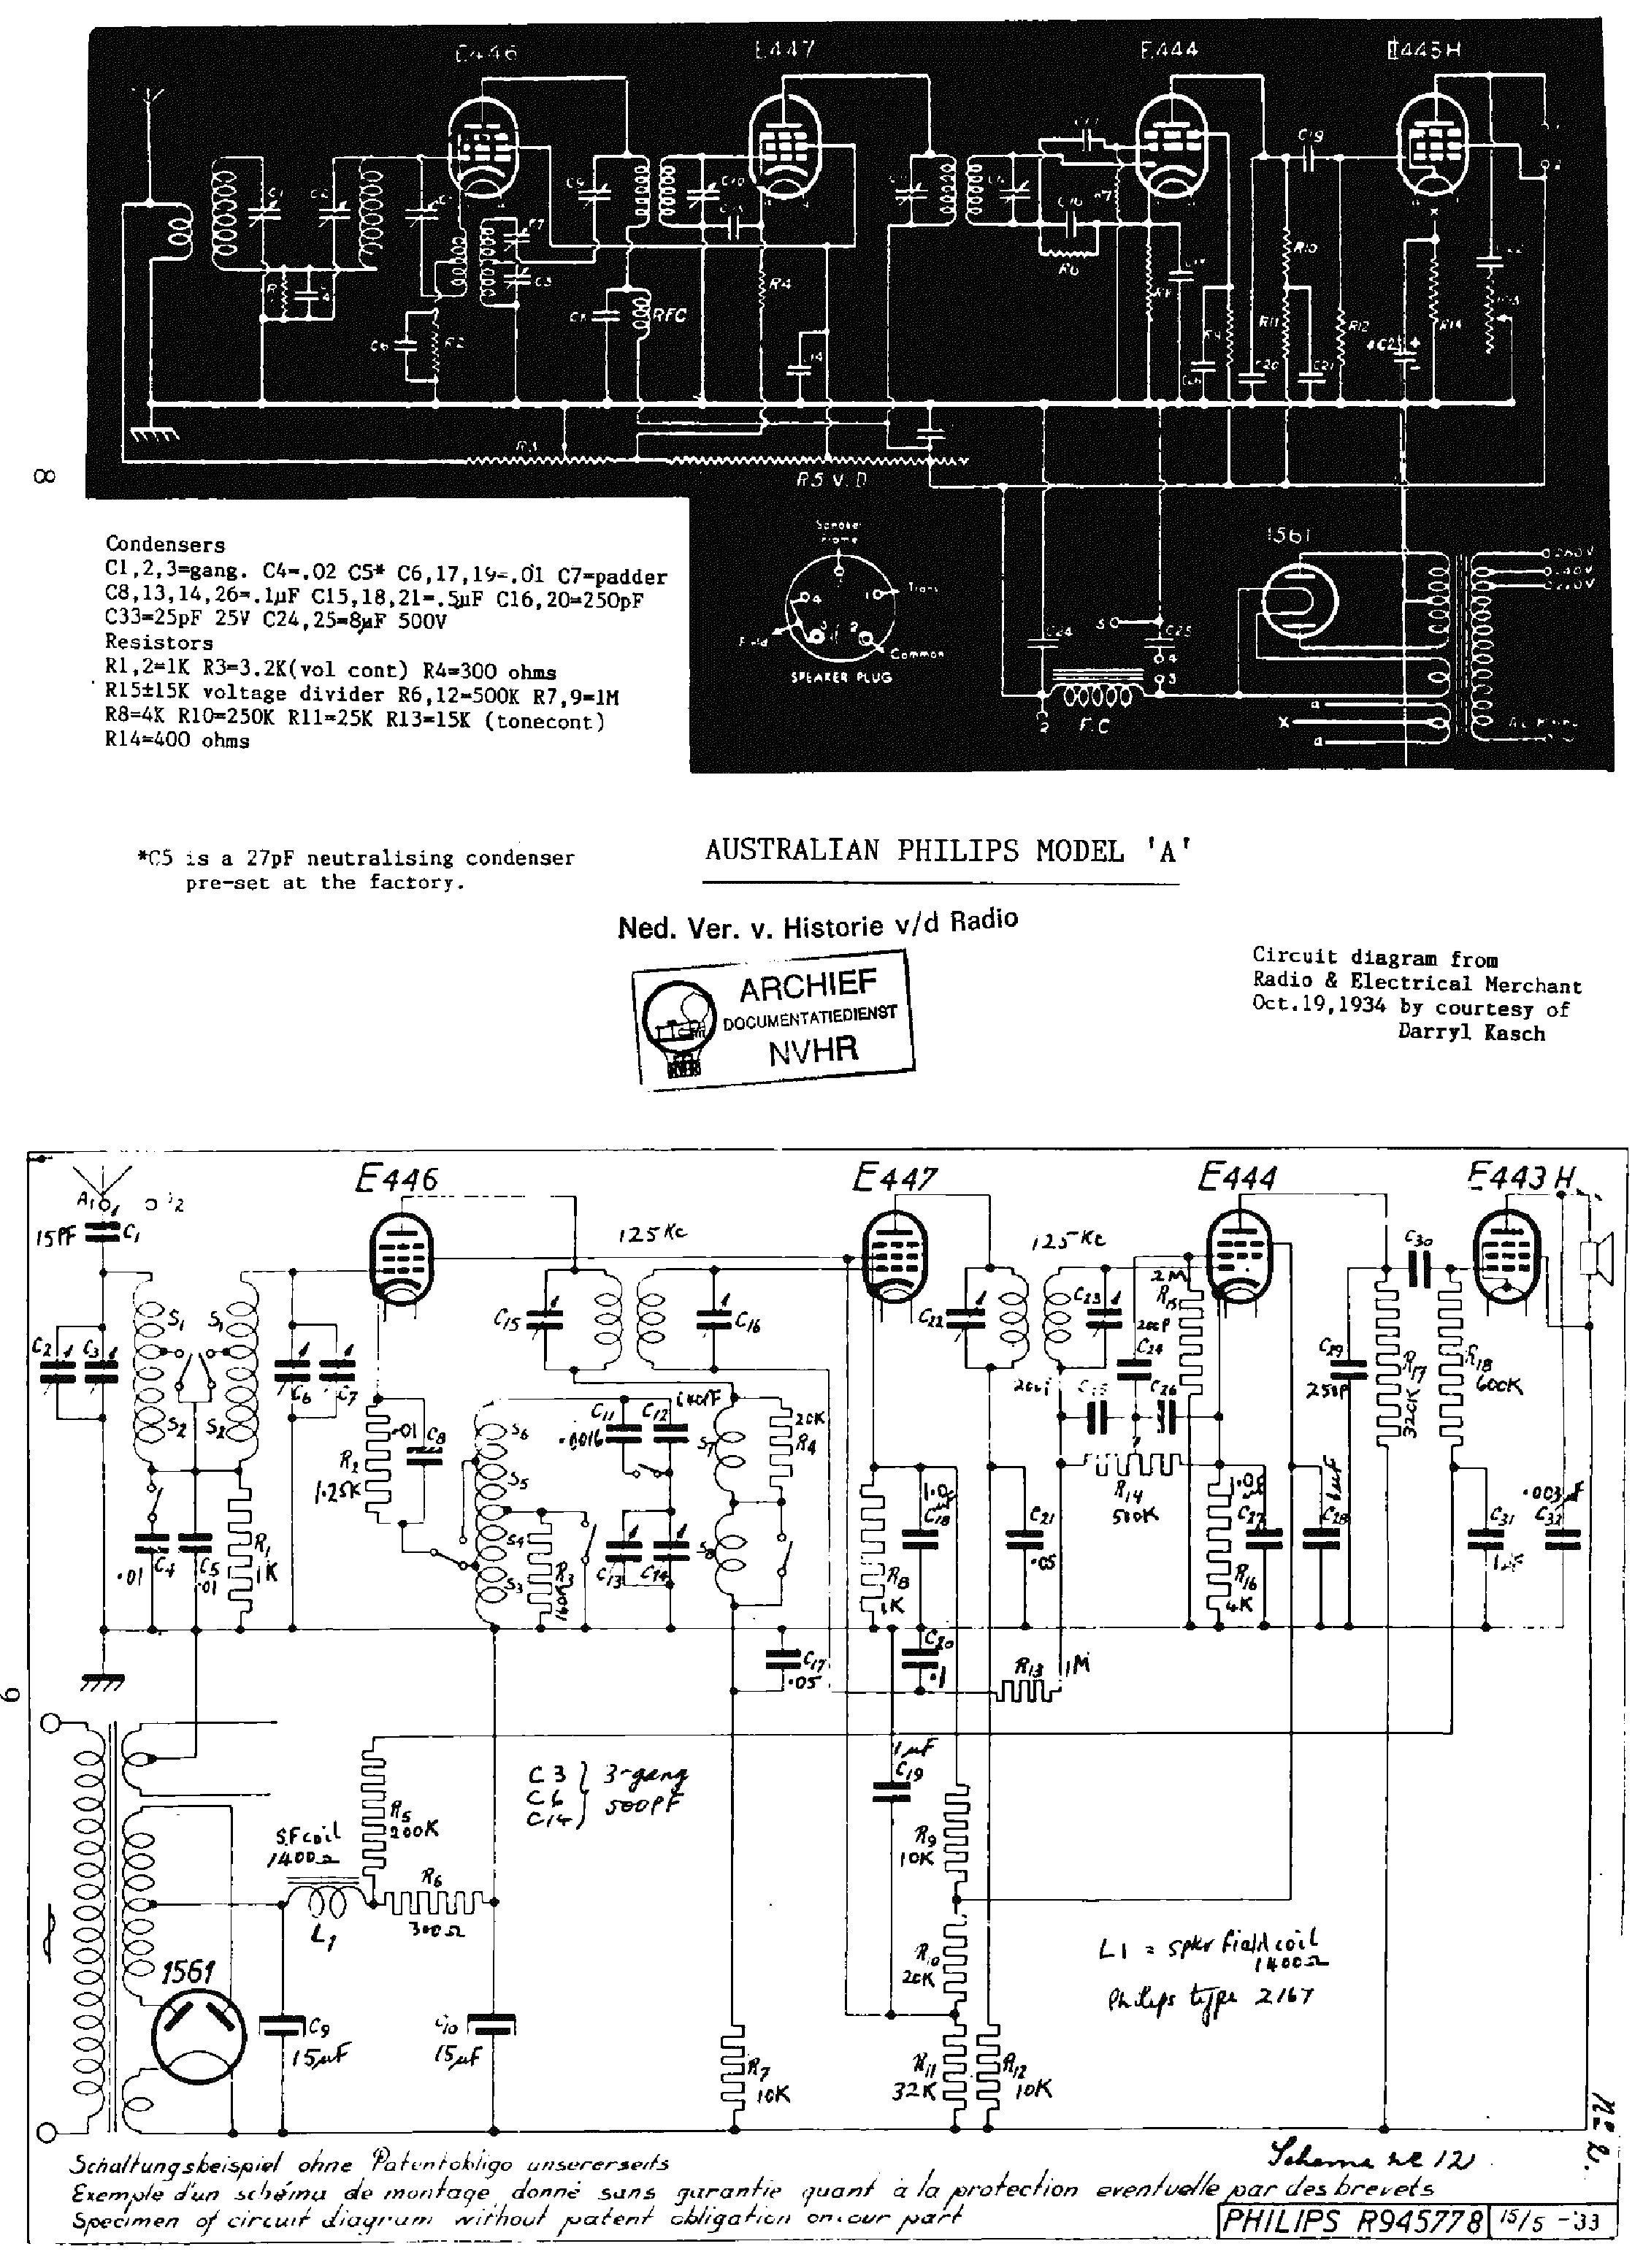 PHILIPS A FIRST AUSTRALIAN SUPERHET 1933 SM service manual (2nd page)